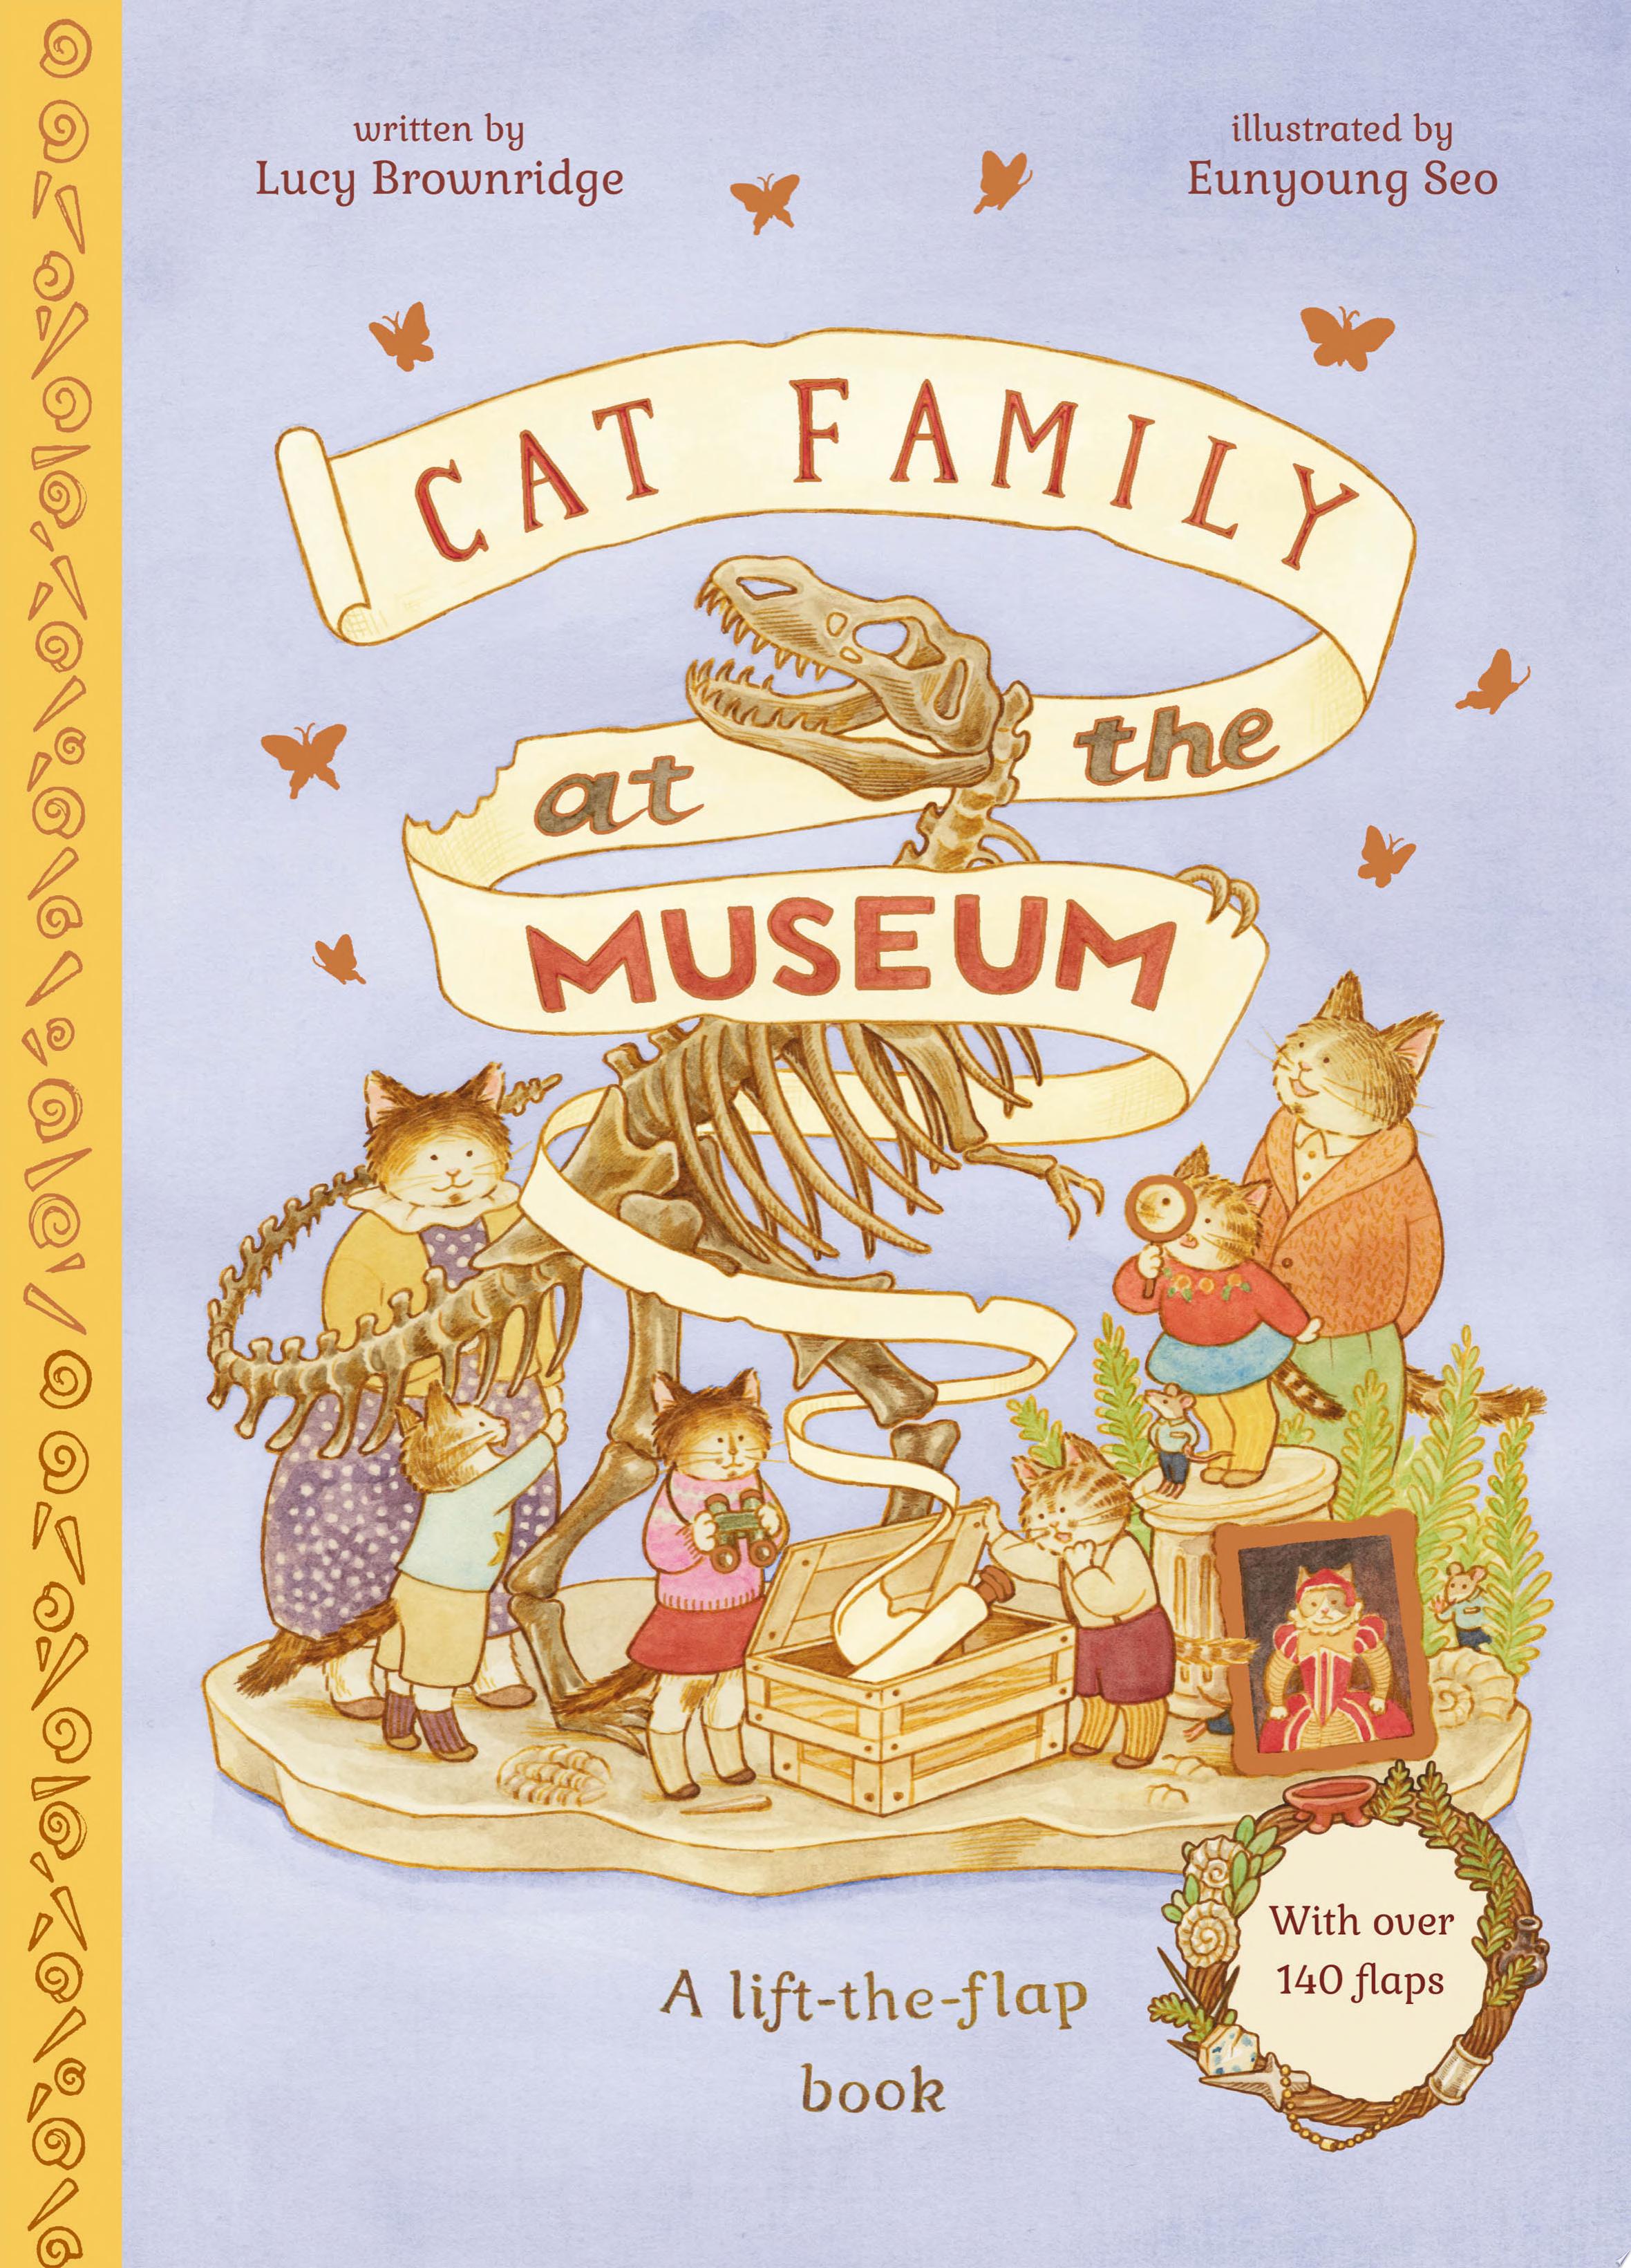 Image for "Cat Family at The Museum"